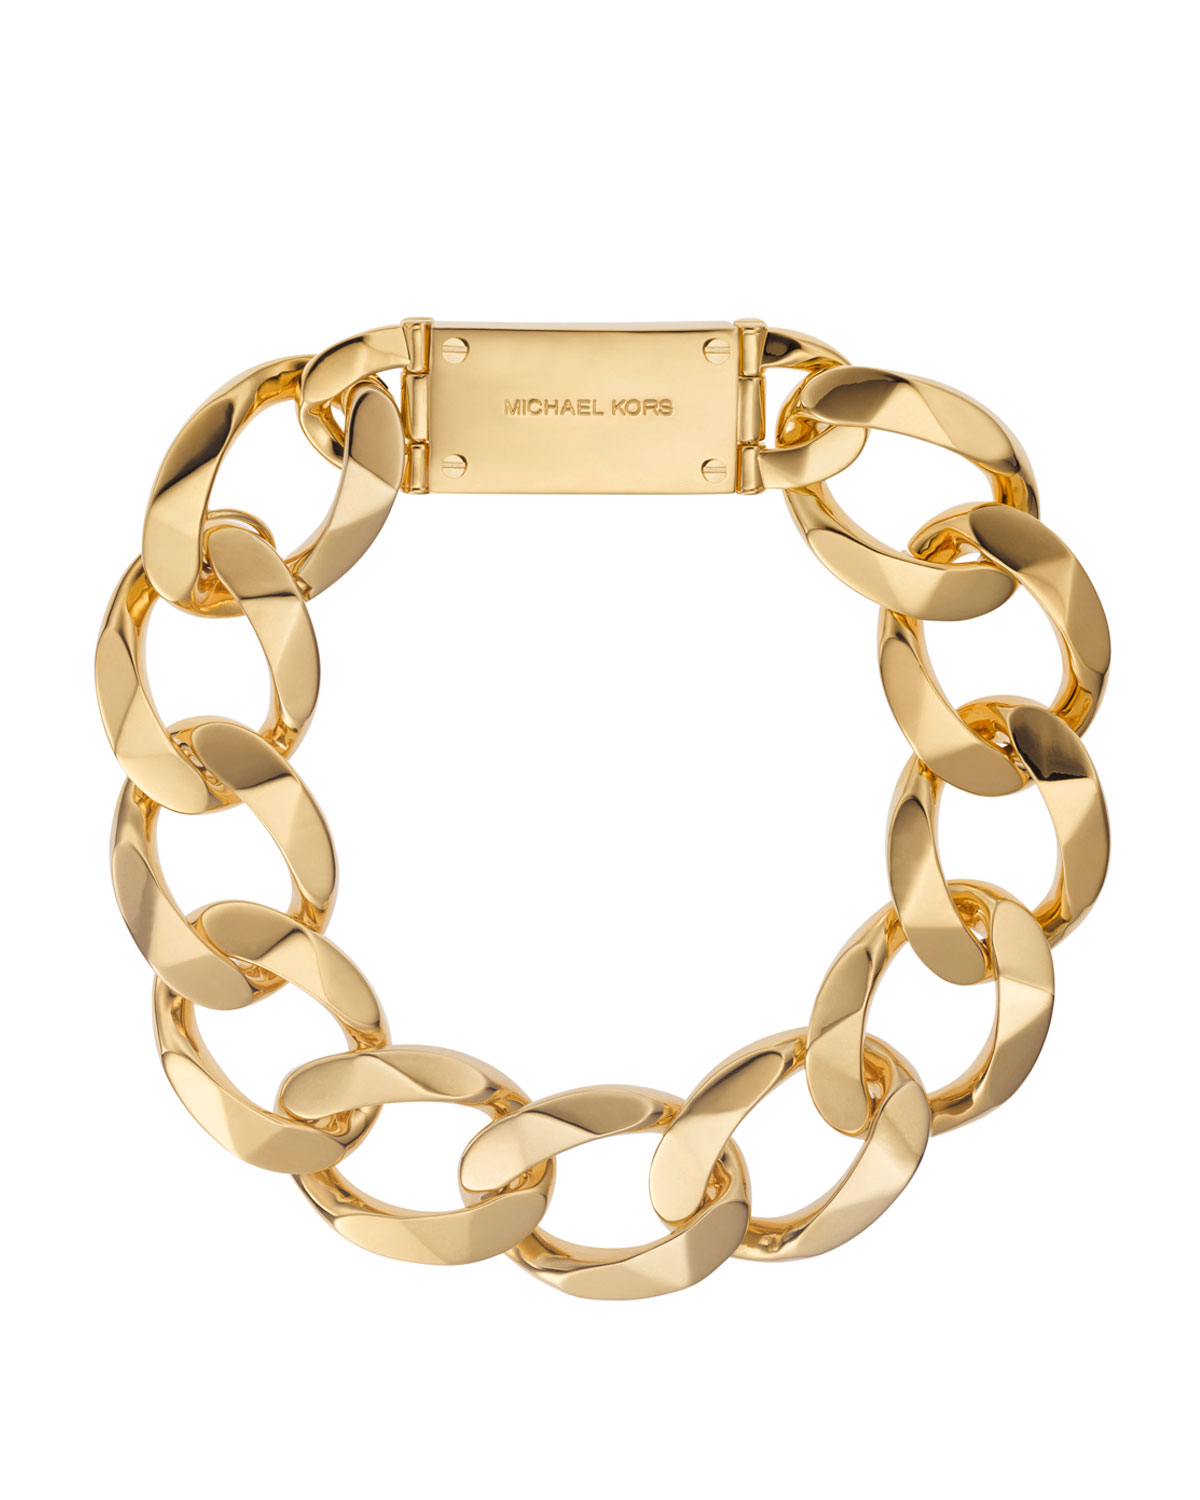 Michael Kors Chainlink Collar Necklace Golden in Gold | Lyst